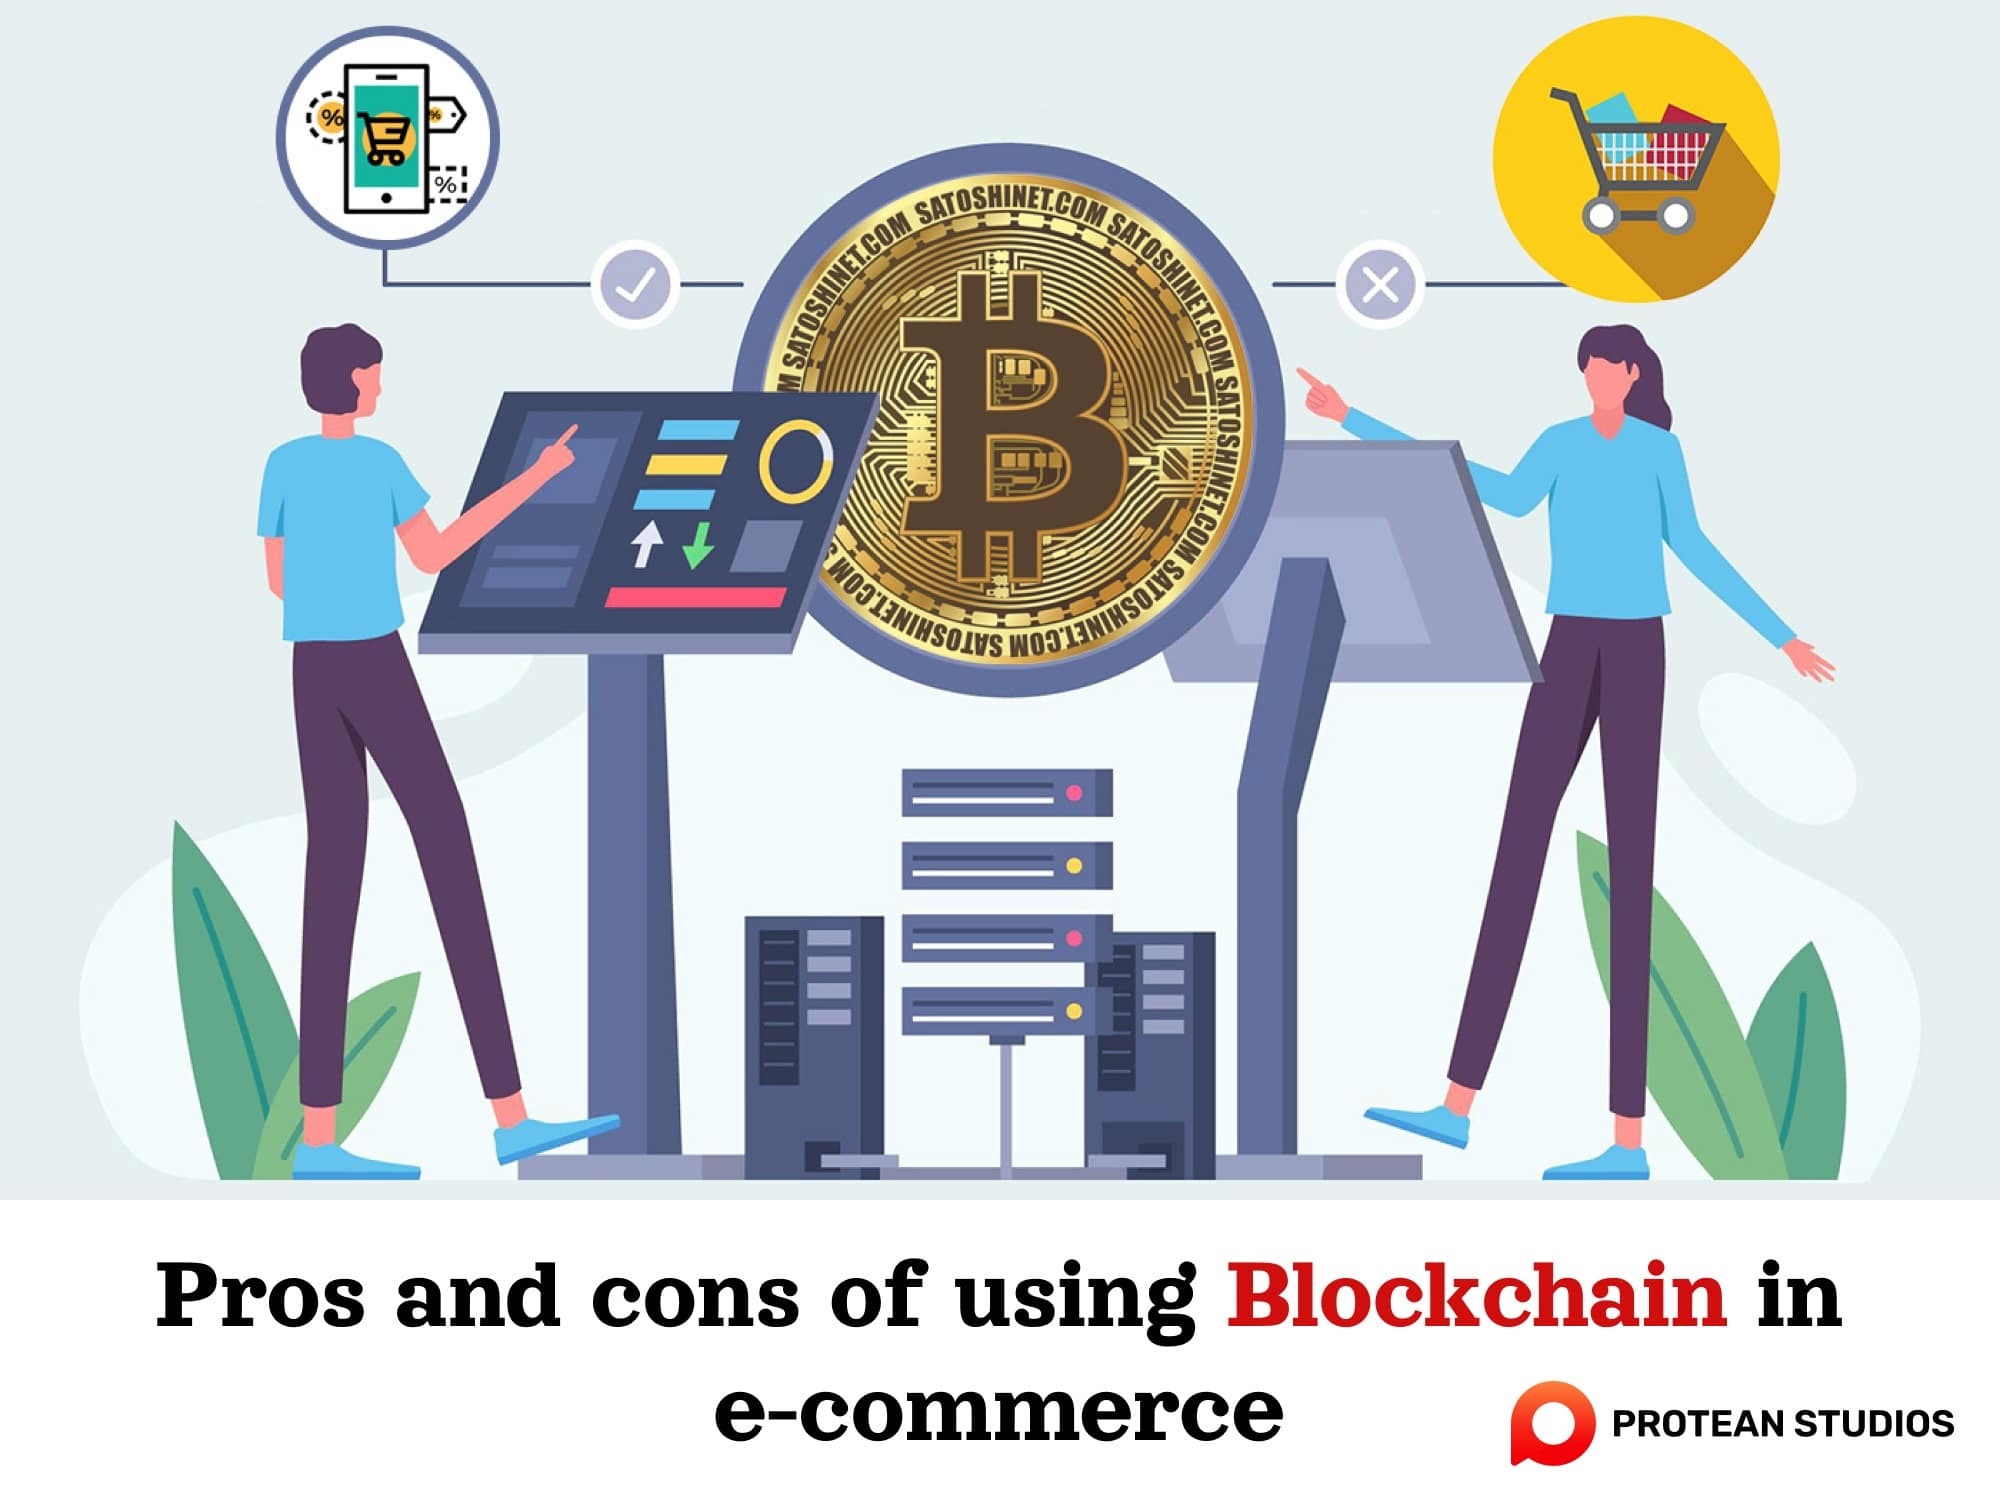 Advantages and disadvantages of using Blockchain in e-commerce